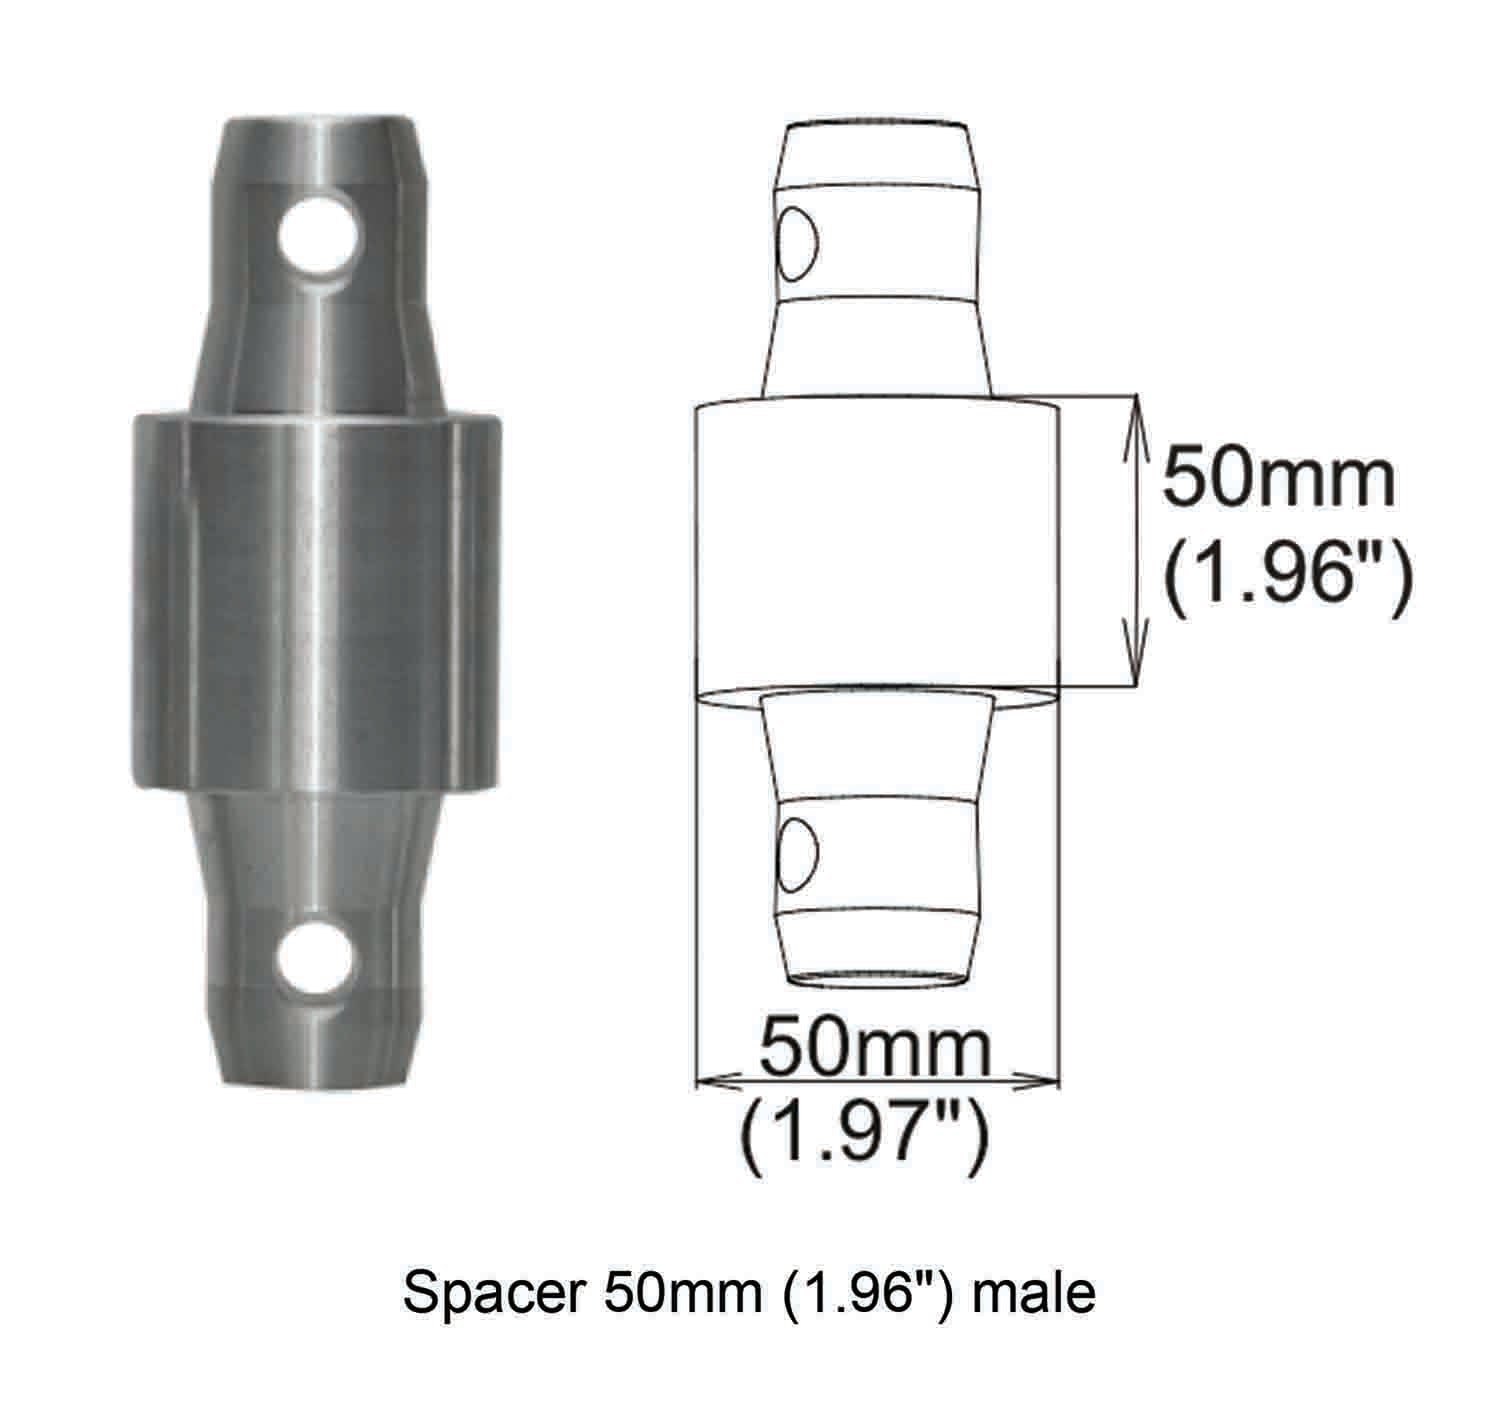 ProX XT-SPMM50 Spacer 50mm Male Coupler - Hollywood DJ